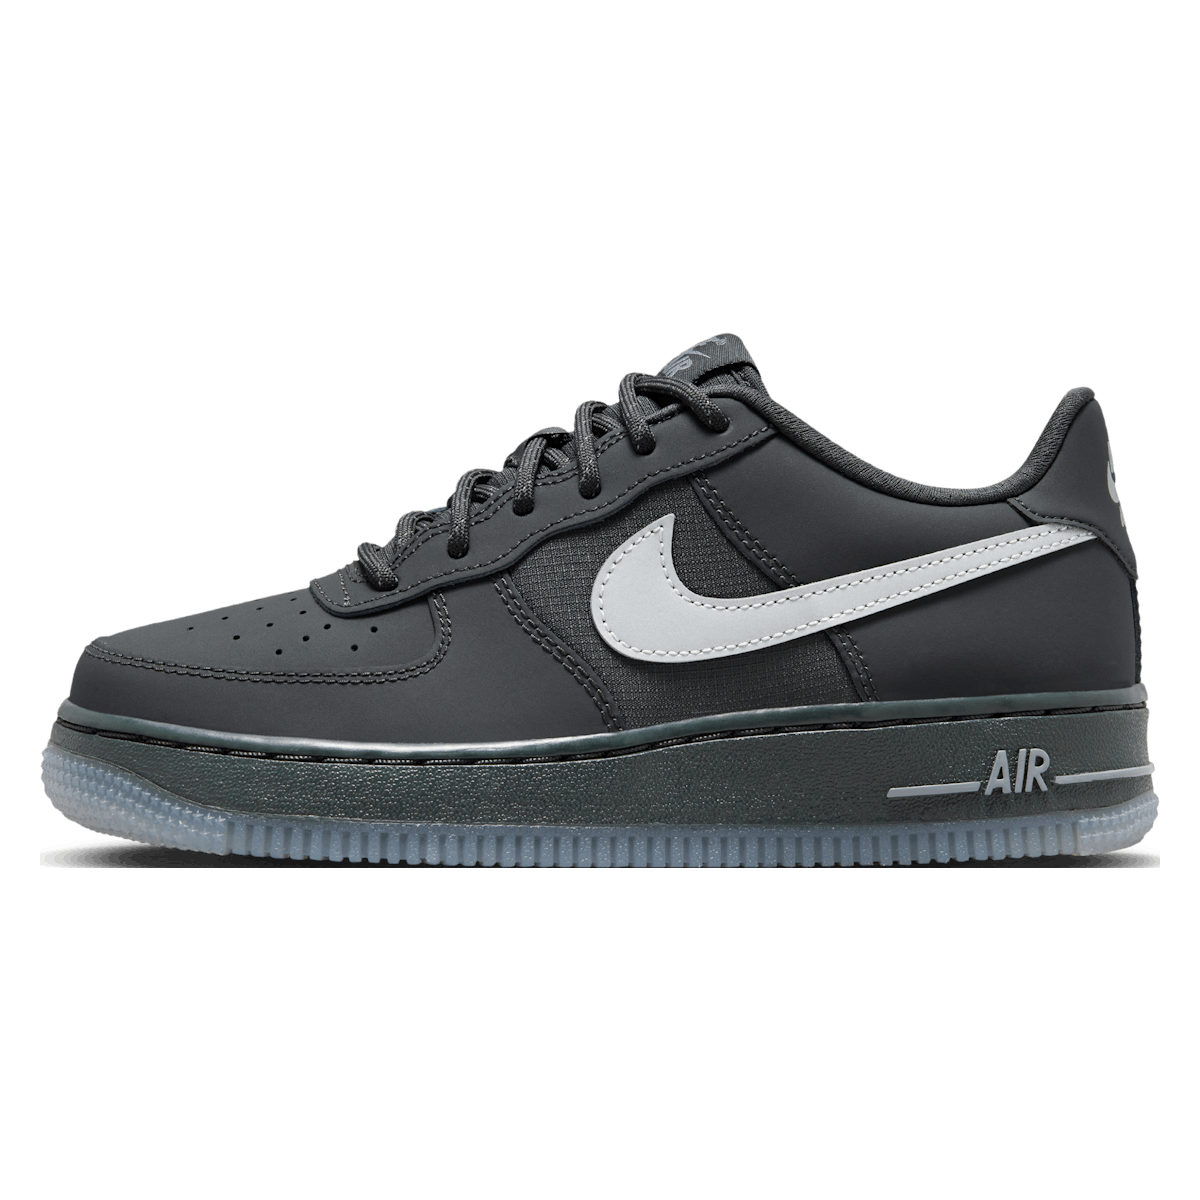 Nike Air Force 1 GS "Anthracite"